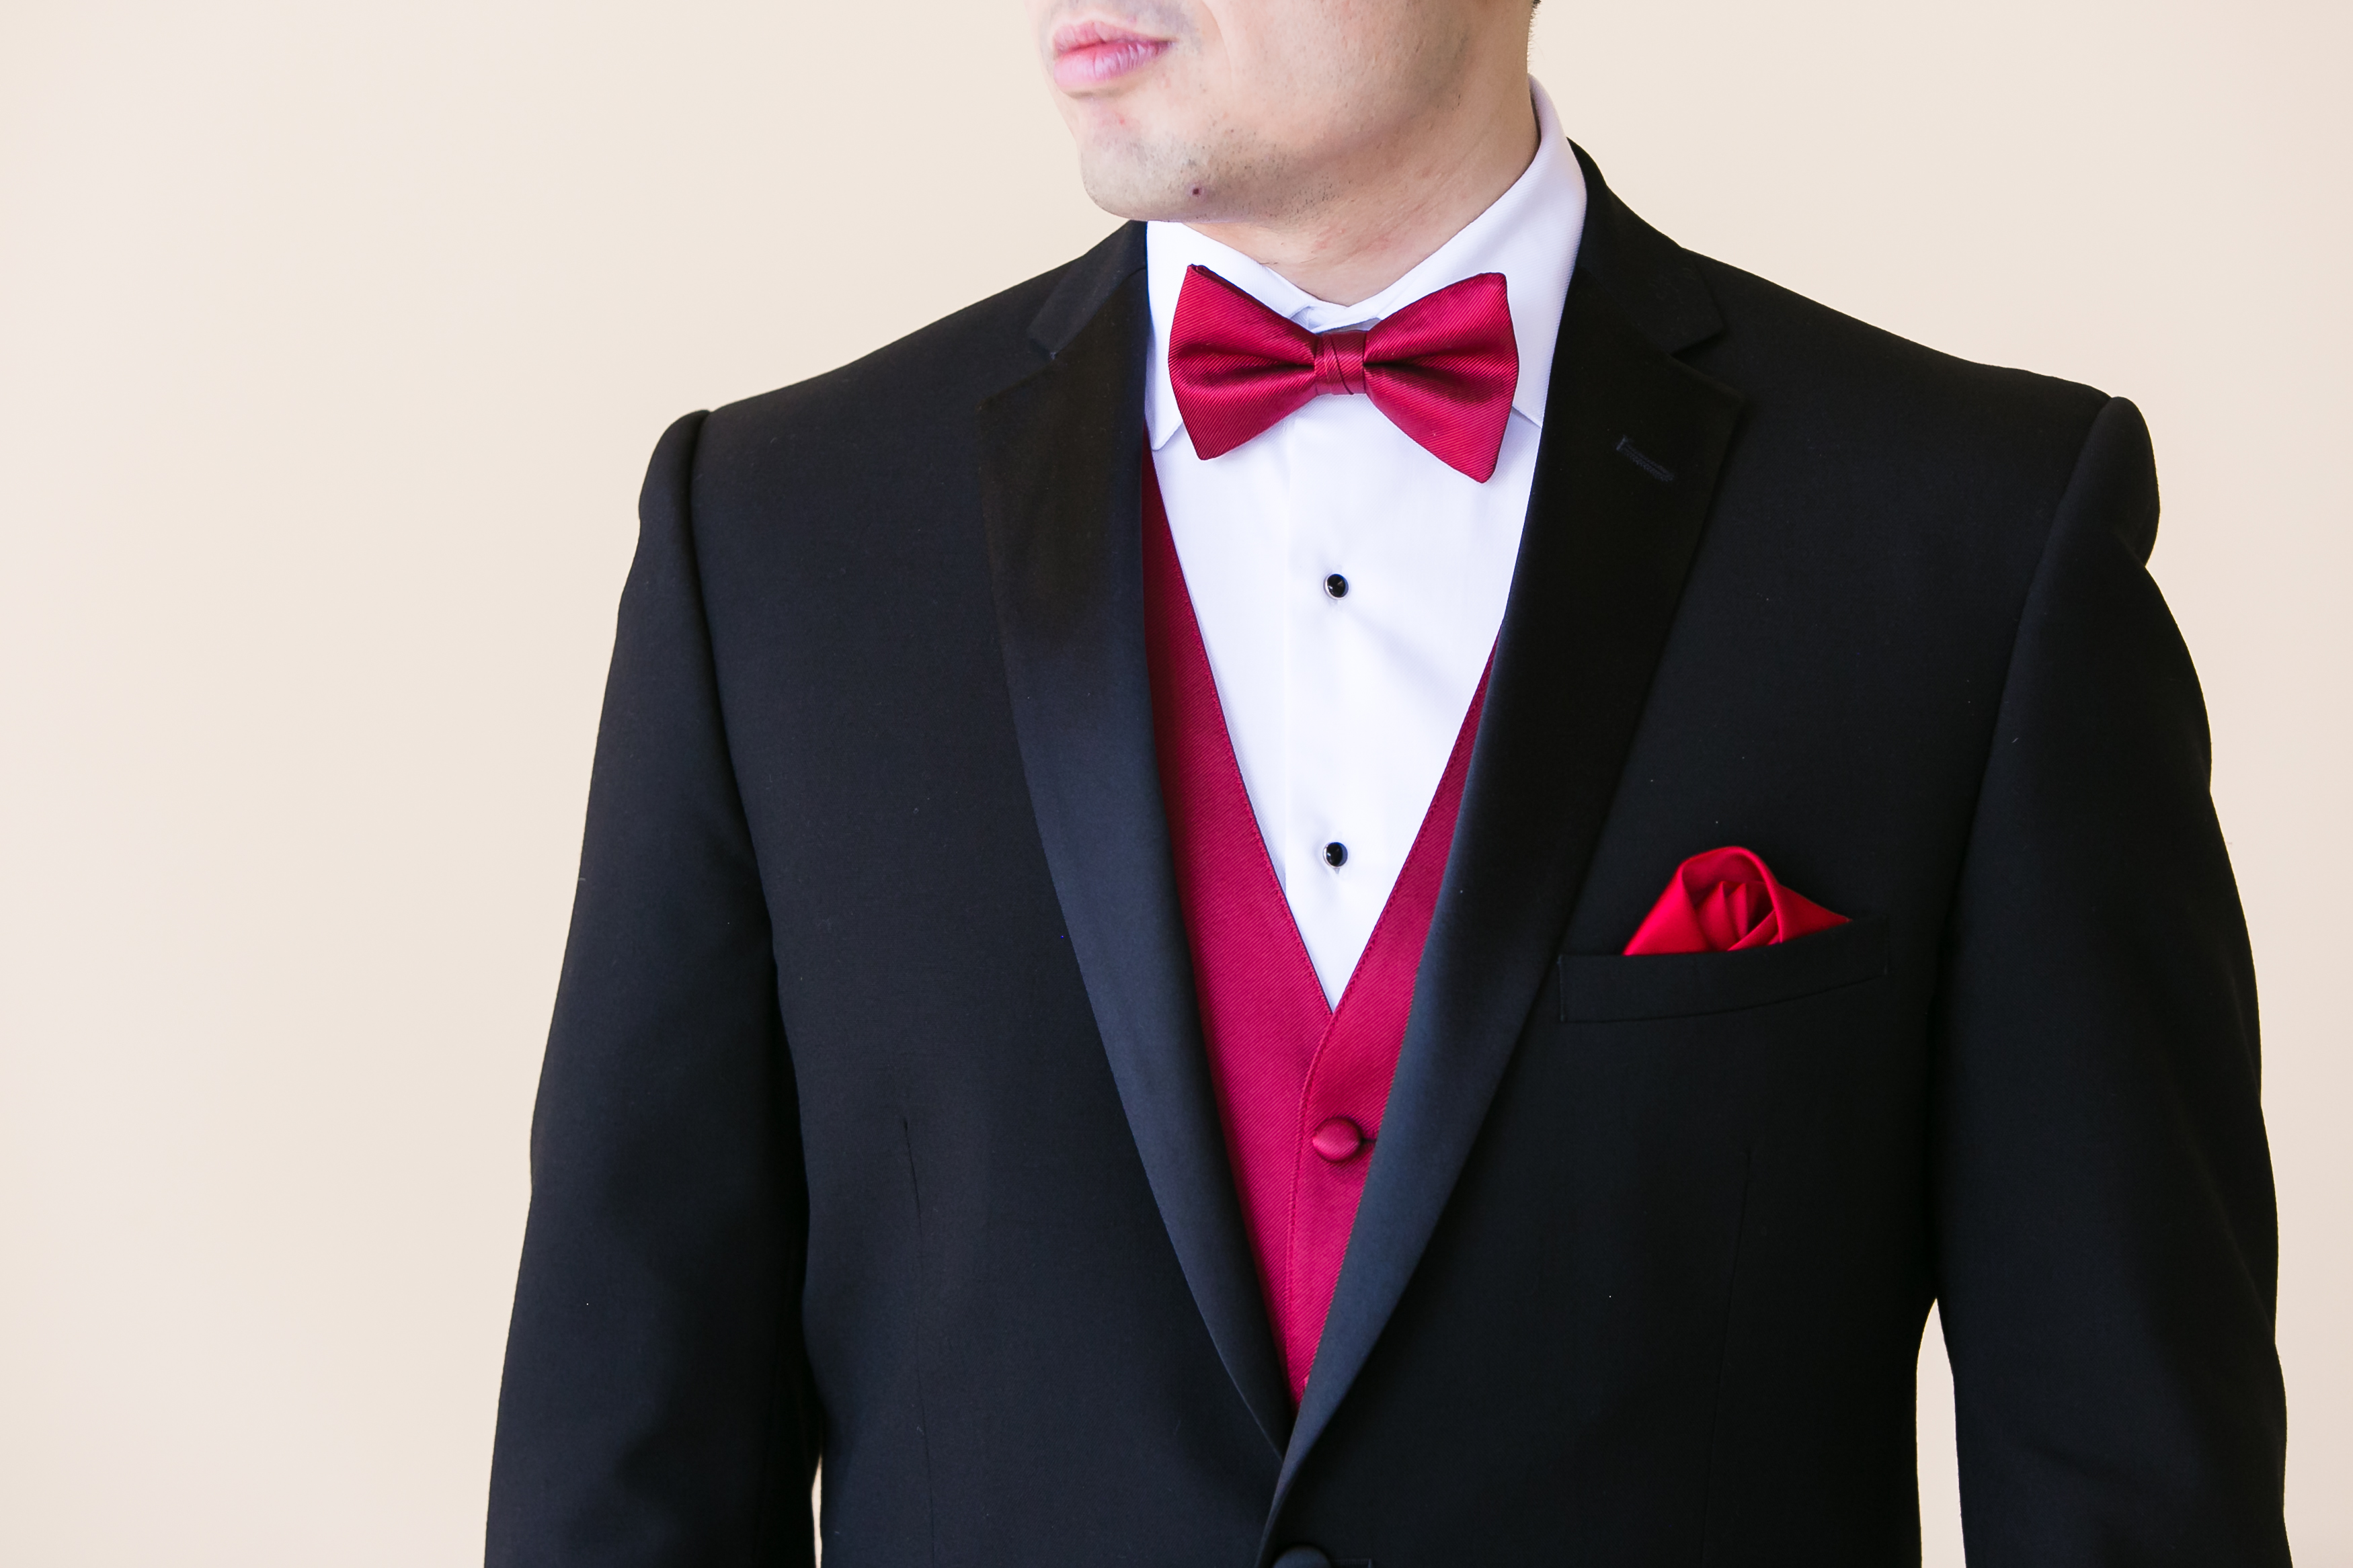 Black tuxedo with a red vest, bow tie and pocket square